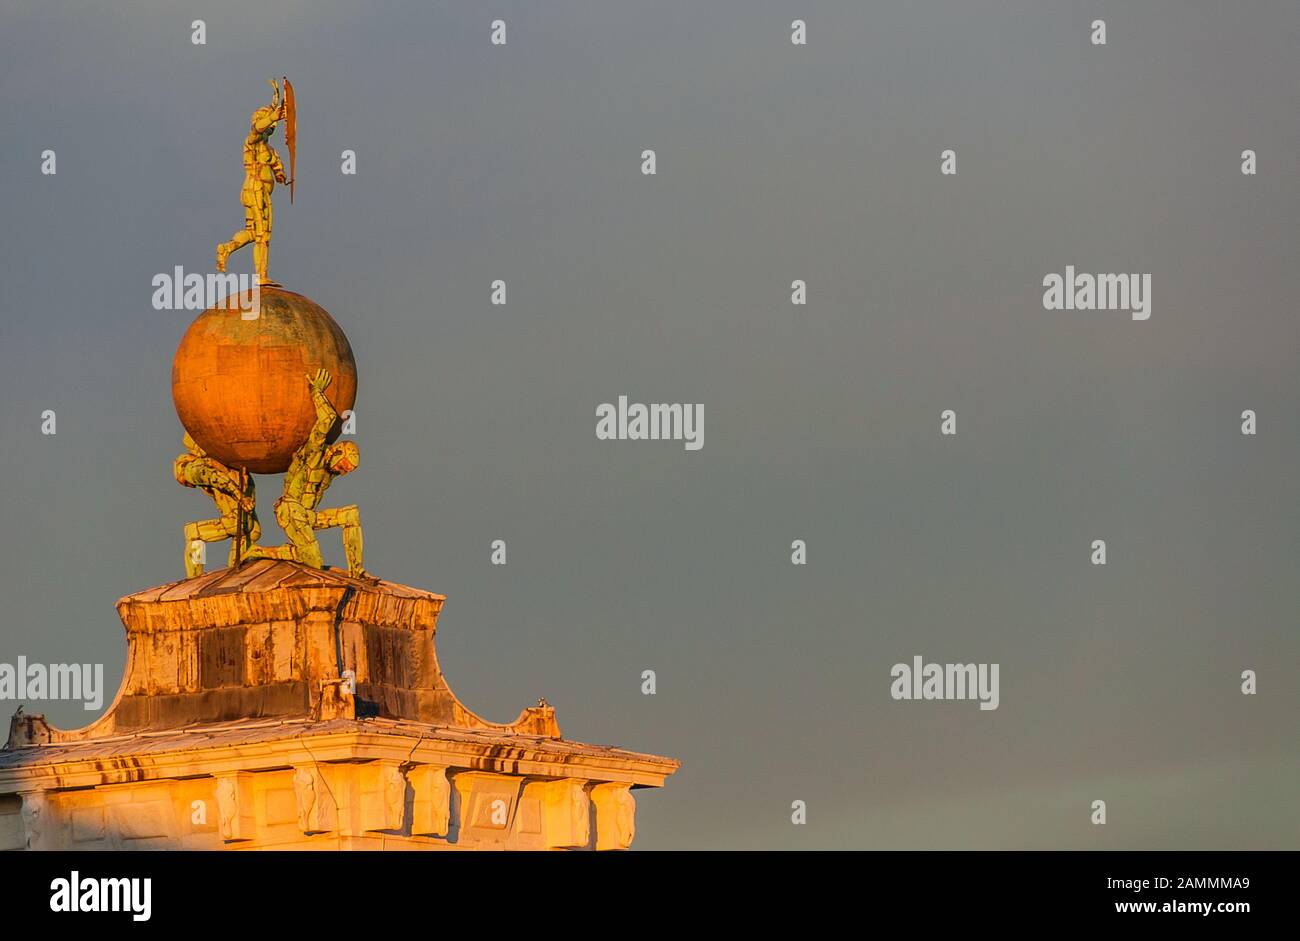 Sunset view of Fortune goddess statue with two atlas and golden globe at the top of Old Customs House in Venice, made in the 17th century by italian a Stock Photo